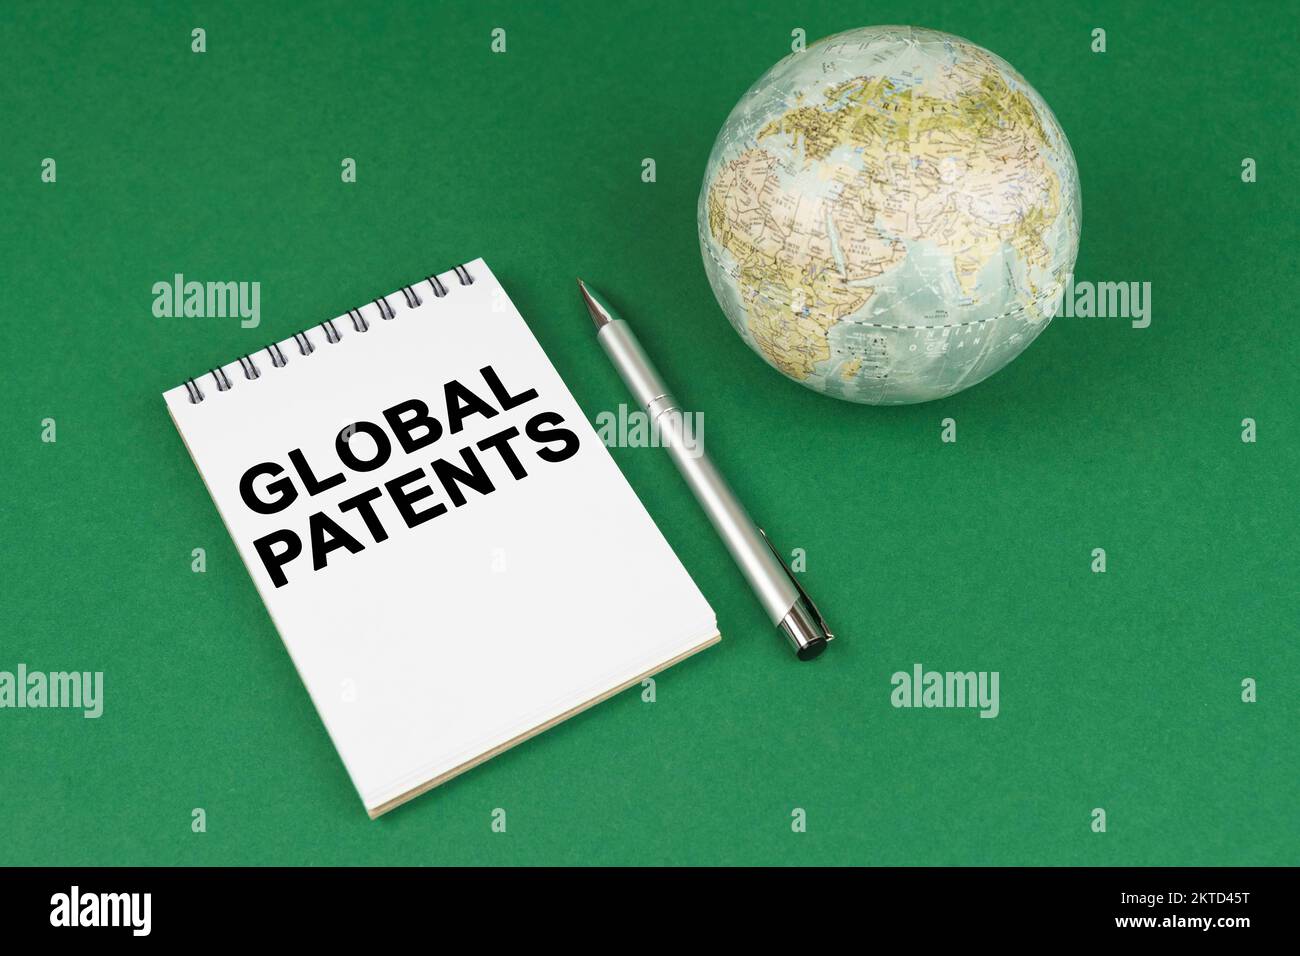 Global concept. On a green surface lies a model of the planet and a notepad with the inscription - Global Patents Stock Photo